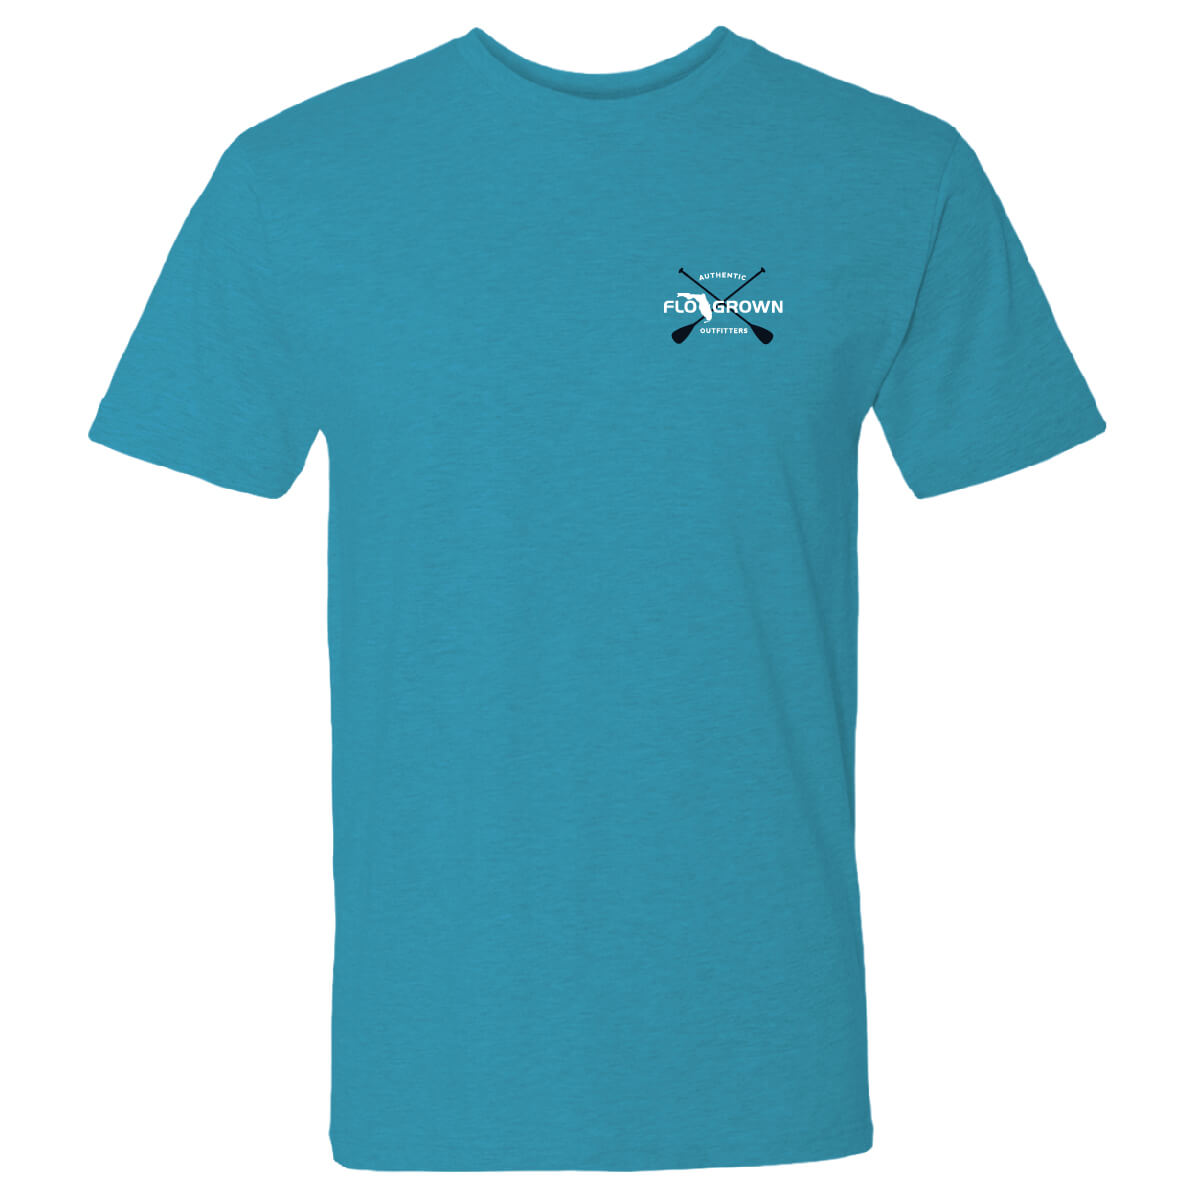 Paddleboard Crest Tee - Front